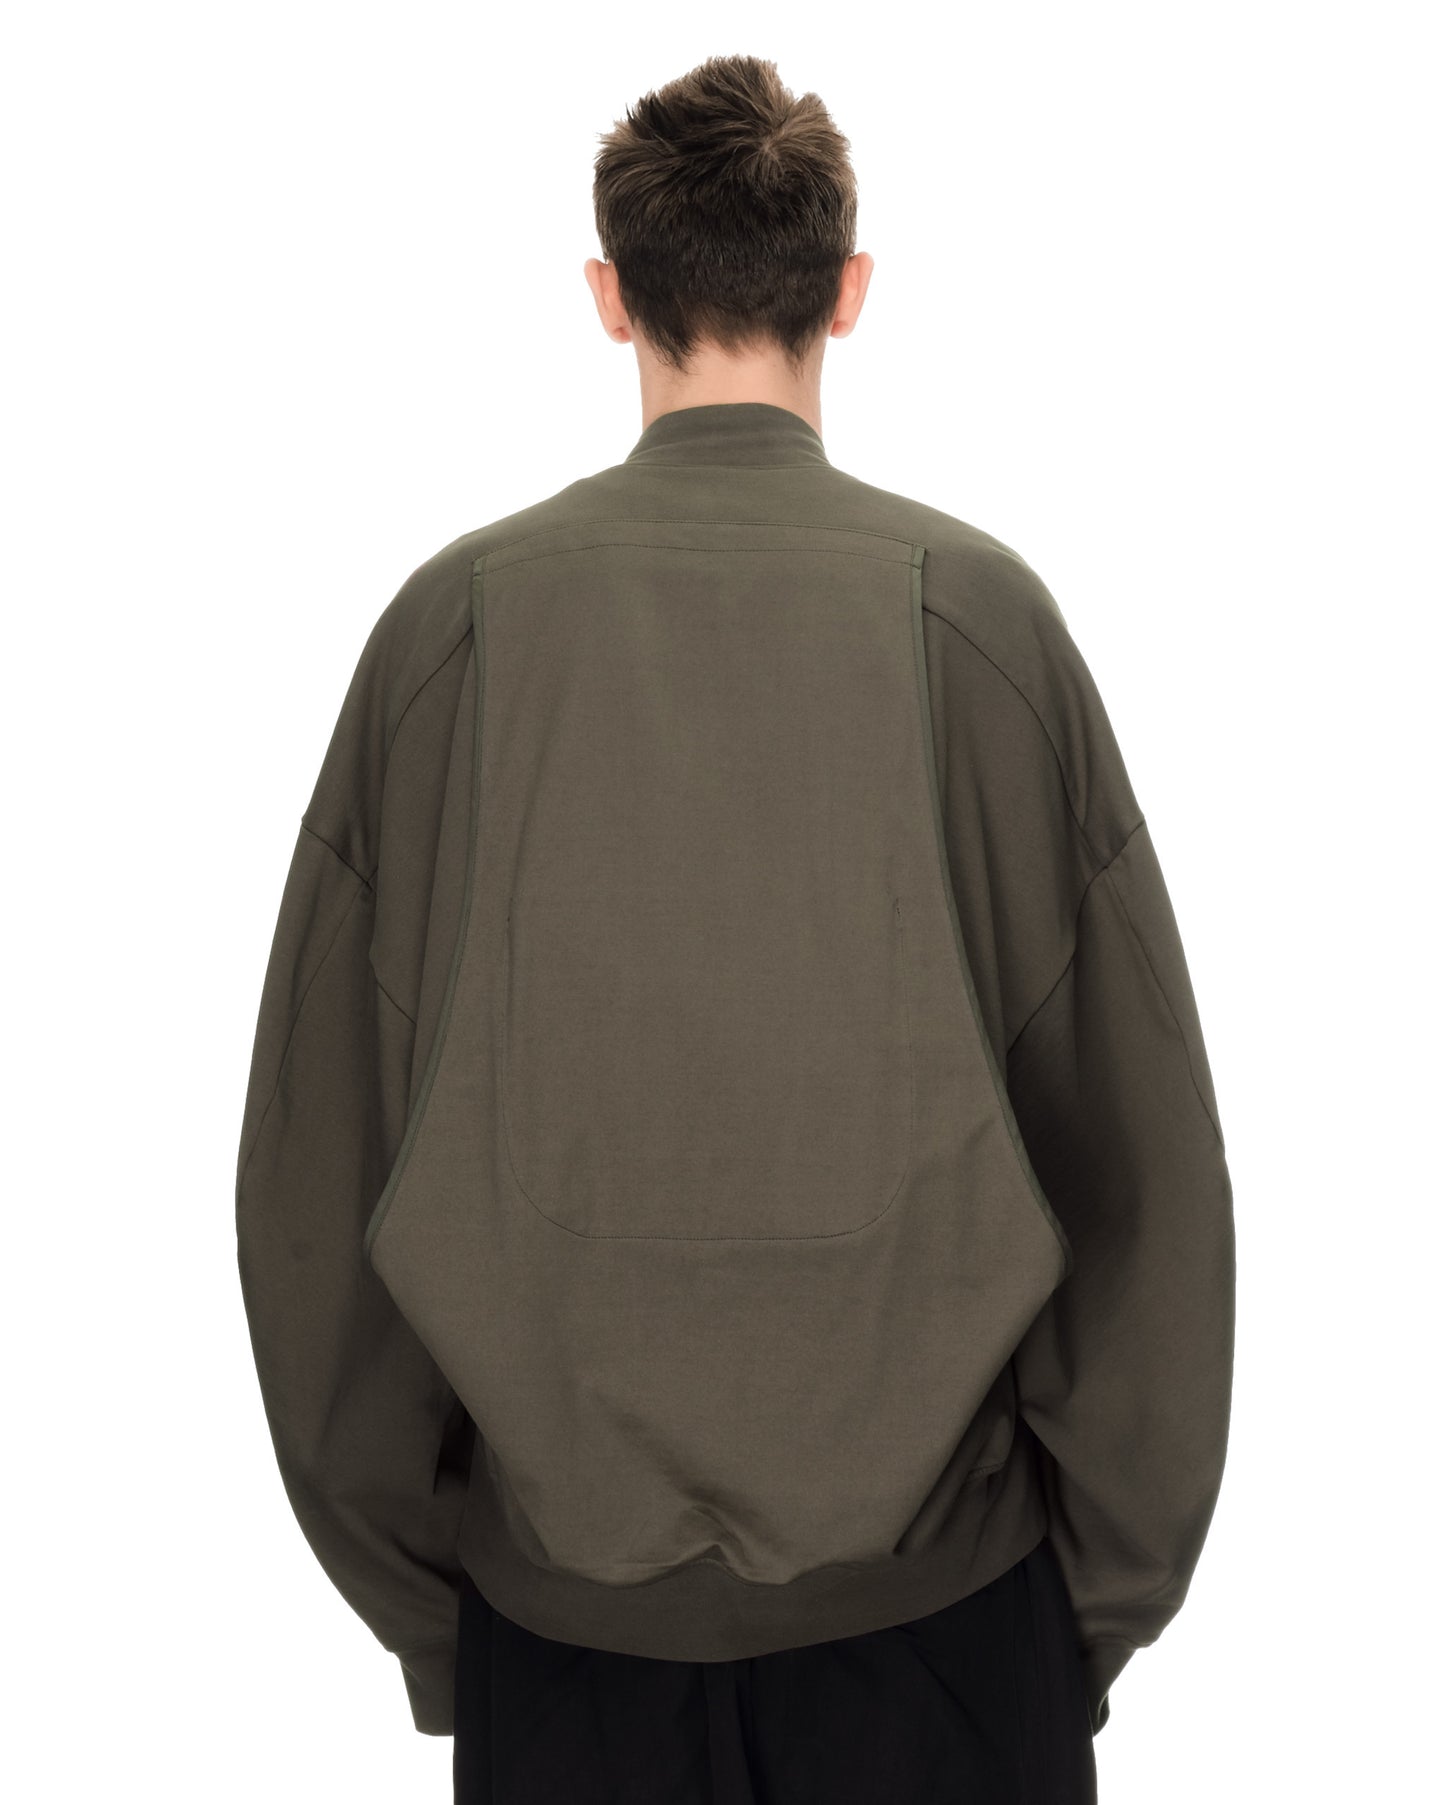 TED LAYERED BOMBER